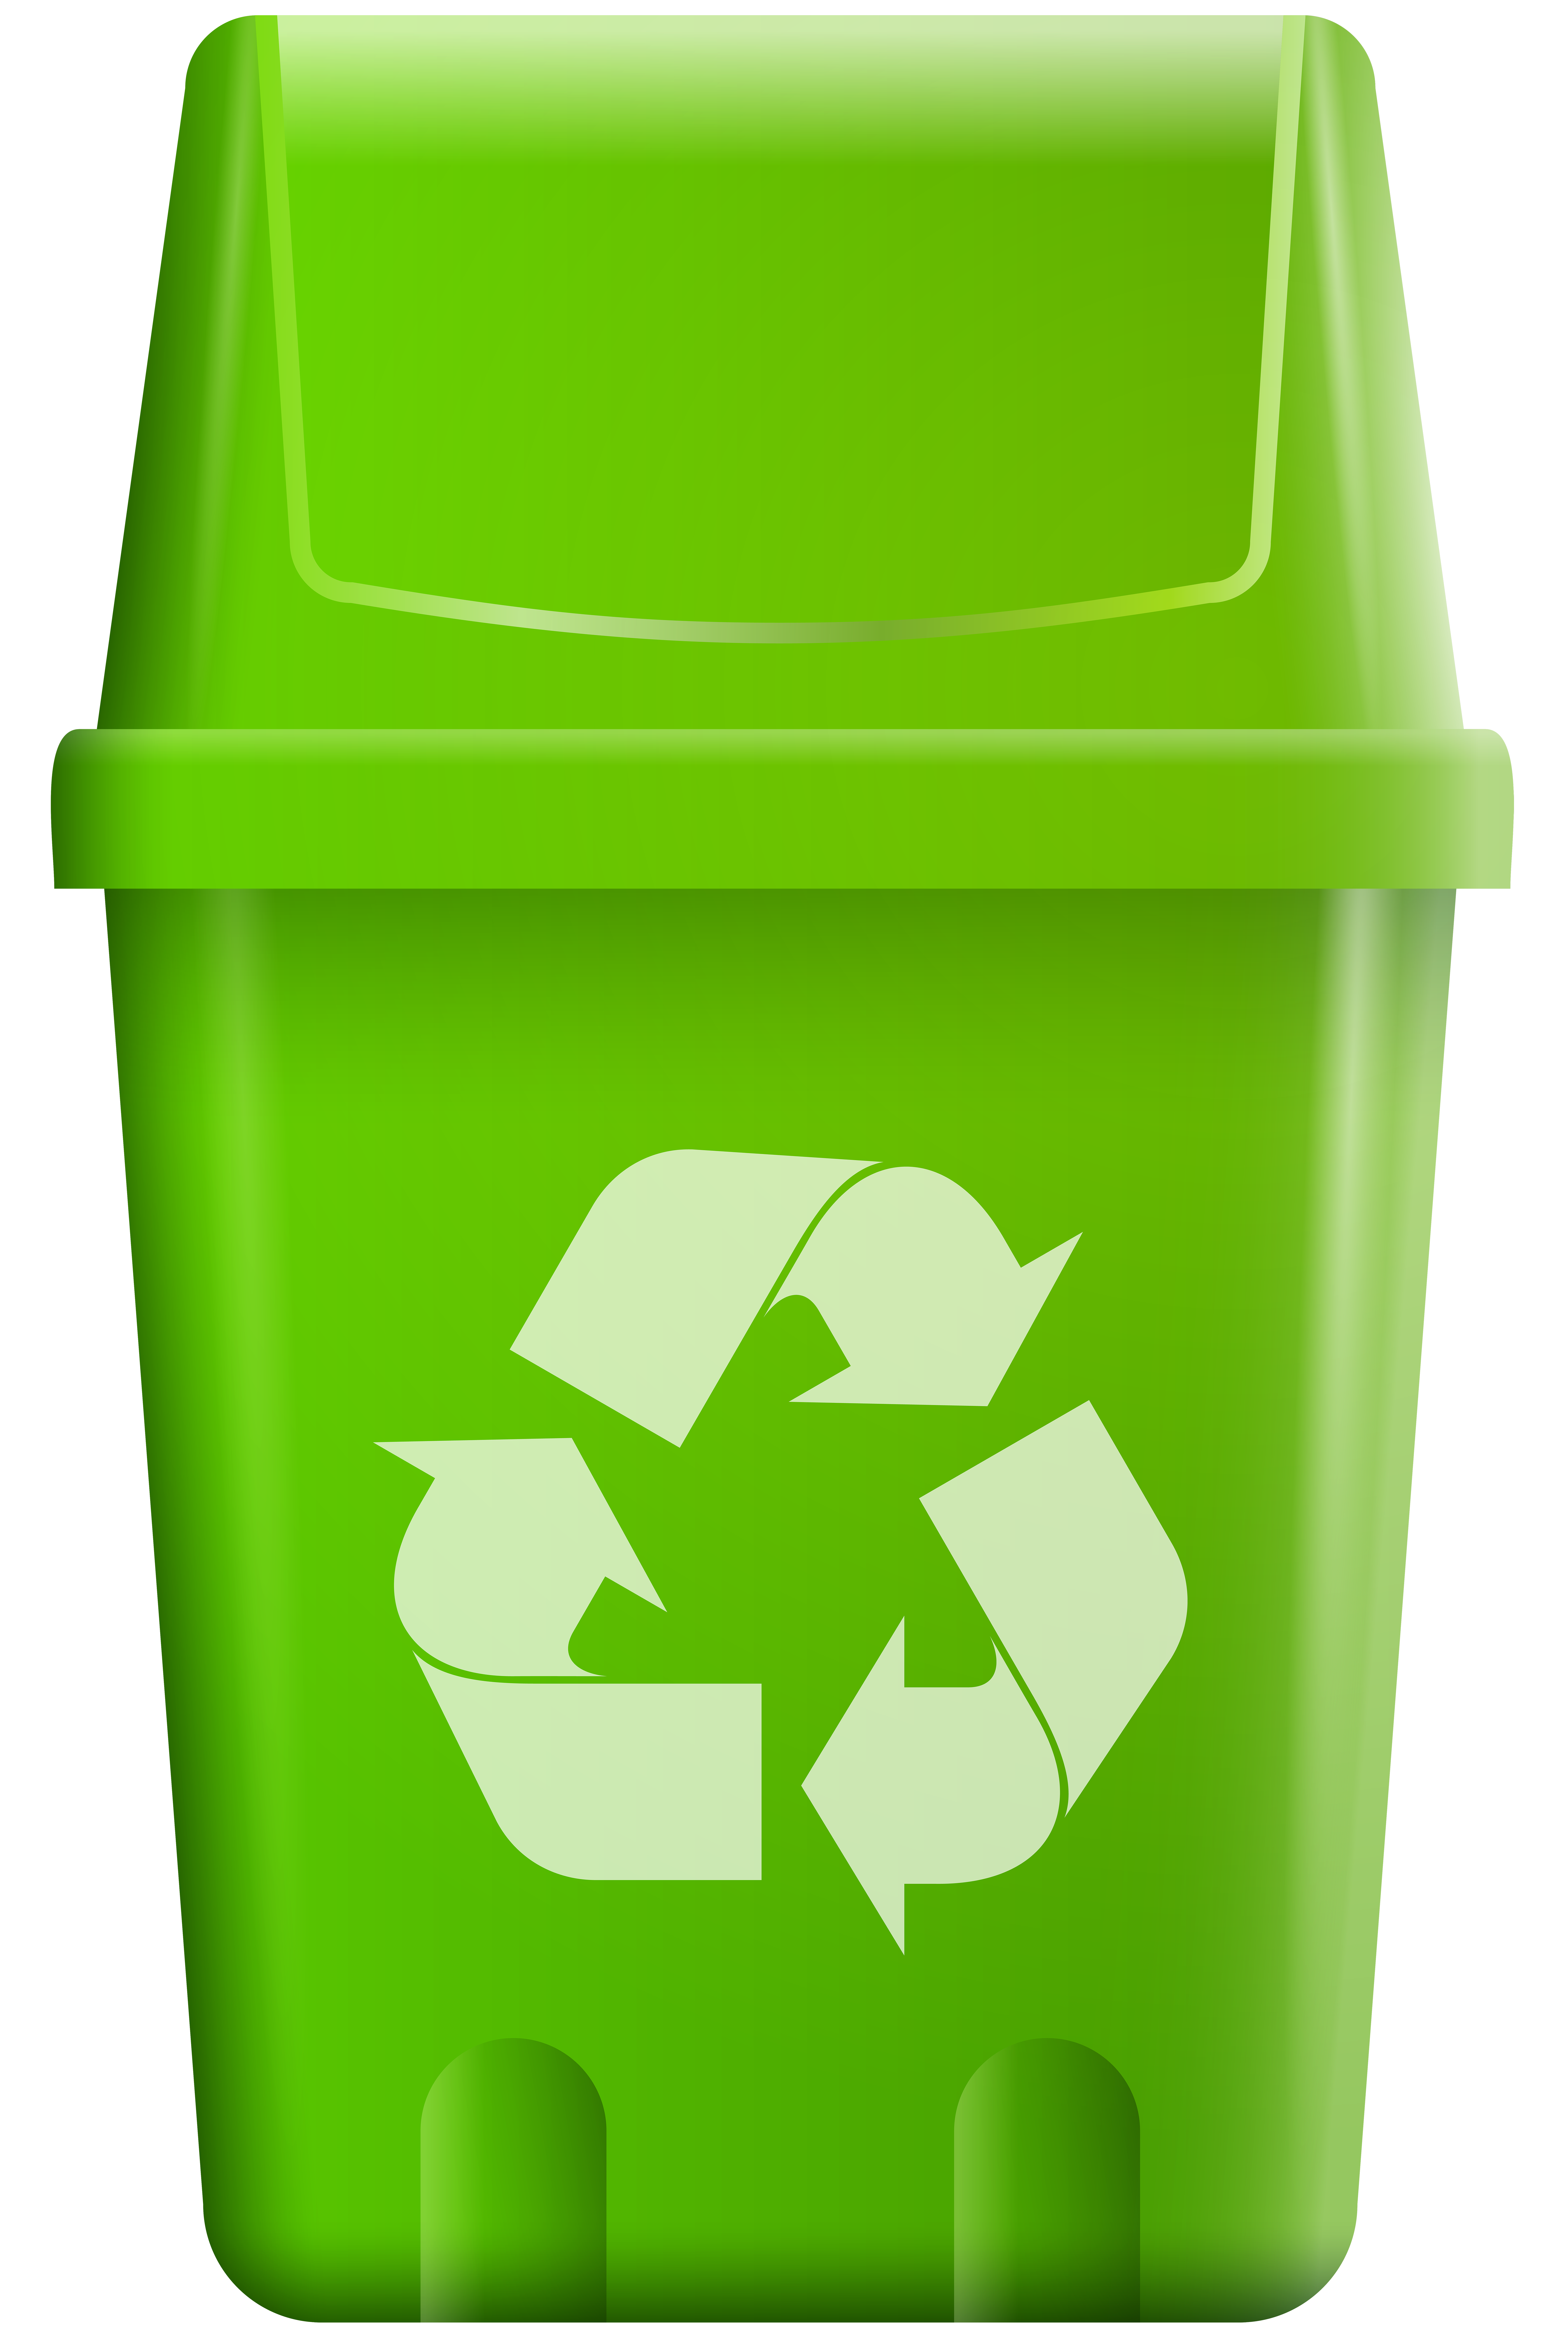 Garbage Trash Bin With Recycle Symbol Png Clip Art Best Web Clipart ...